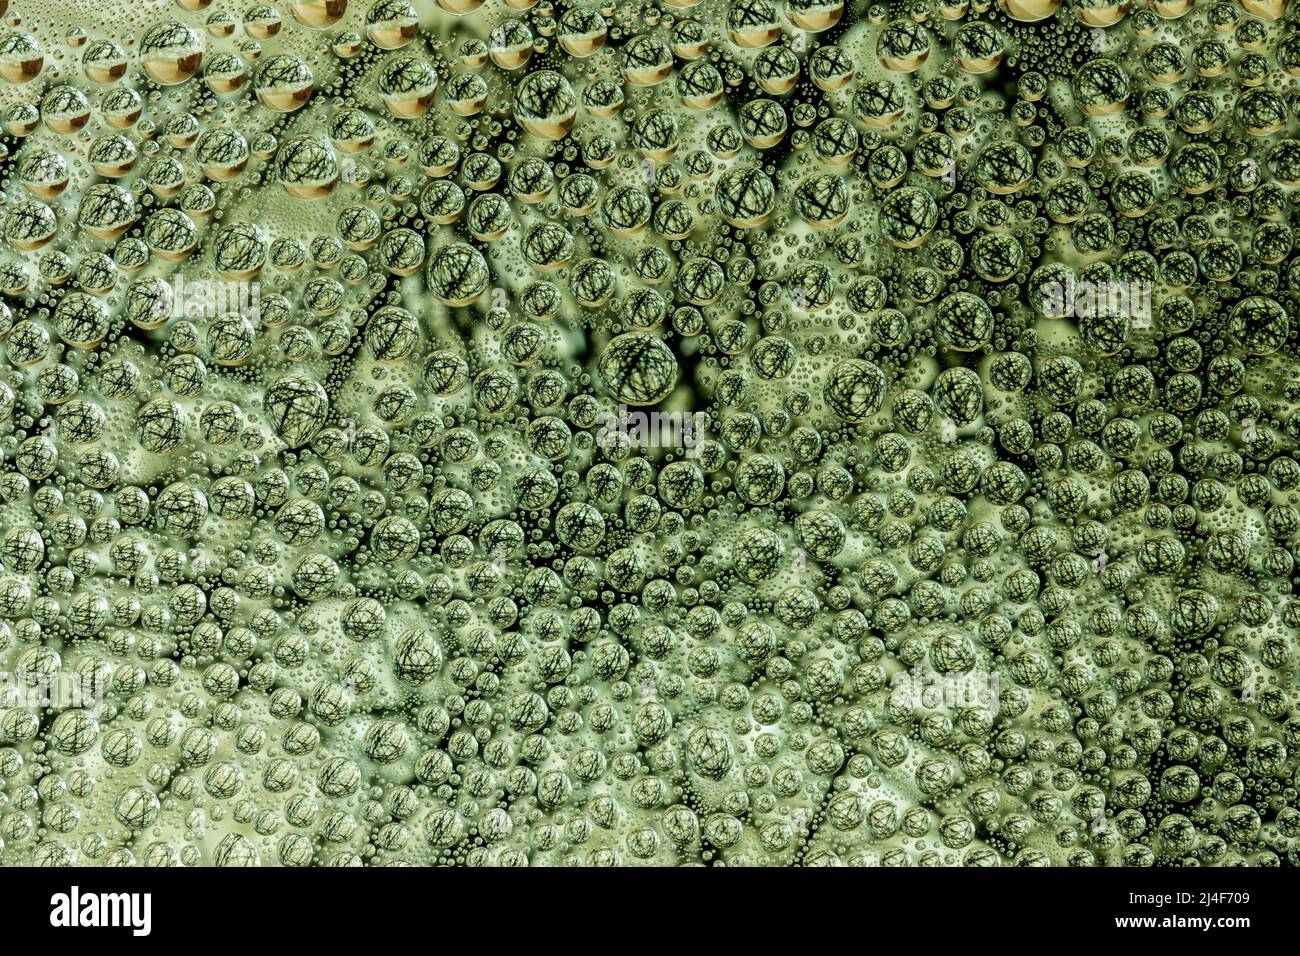 Abstract background of water droplets on the glass surface Stock Photo